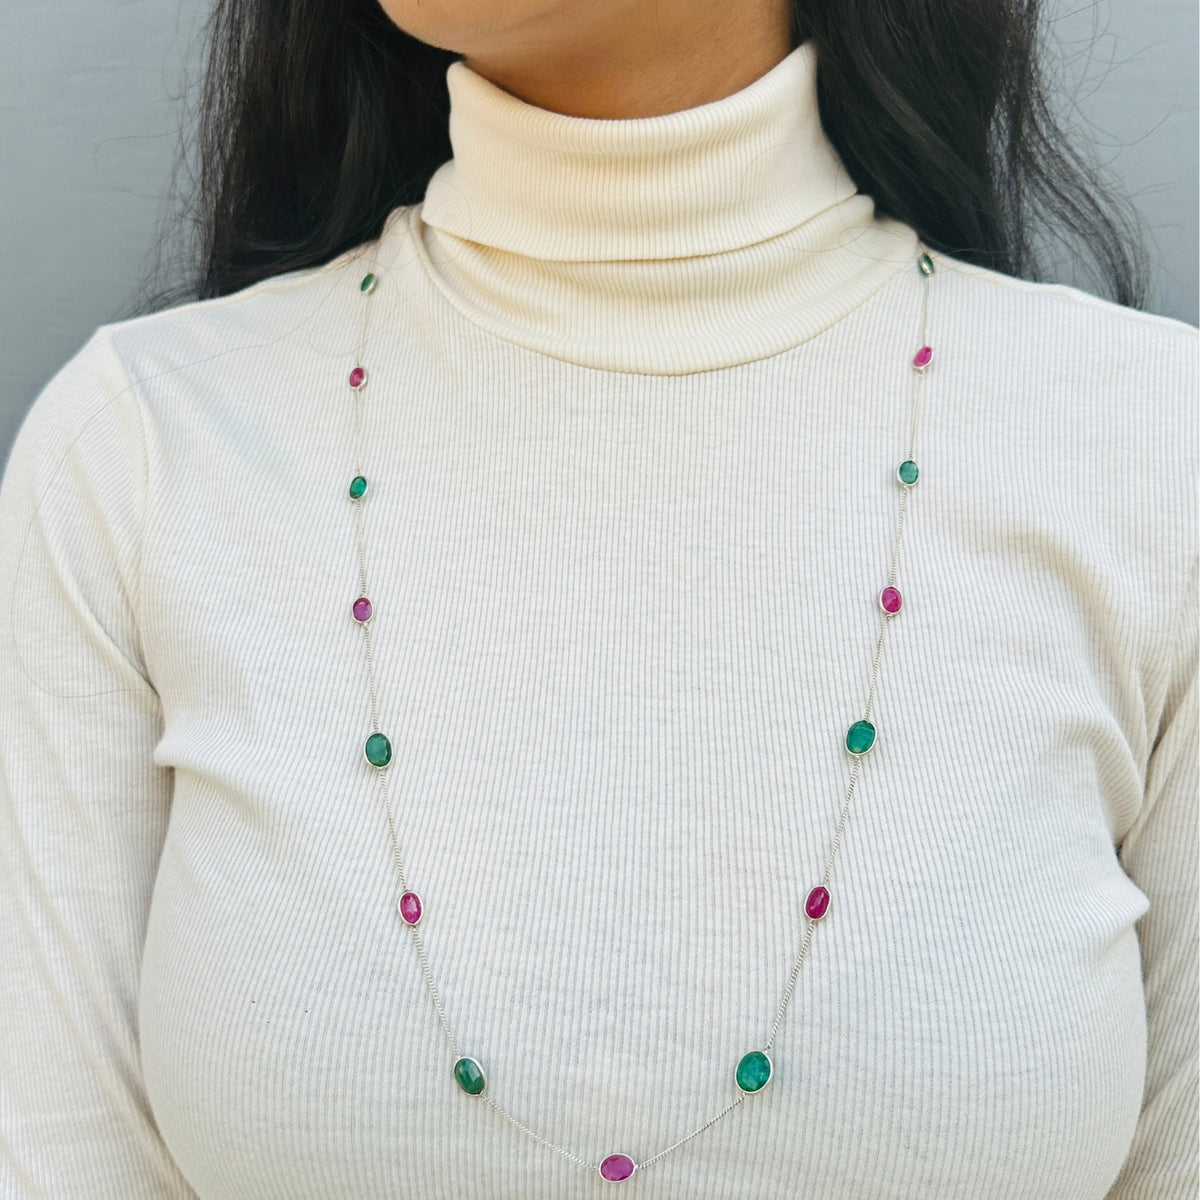 Classic Emerald and Ruby Silver 925 Necklace